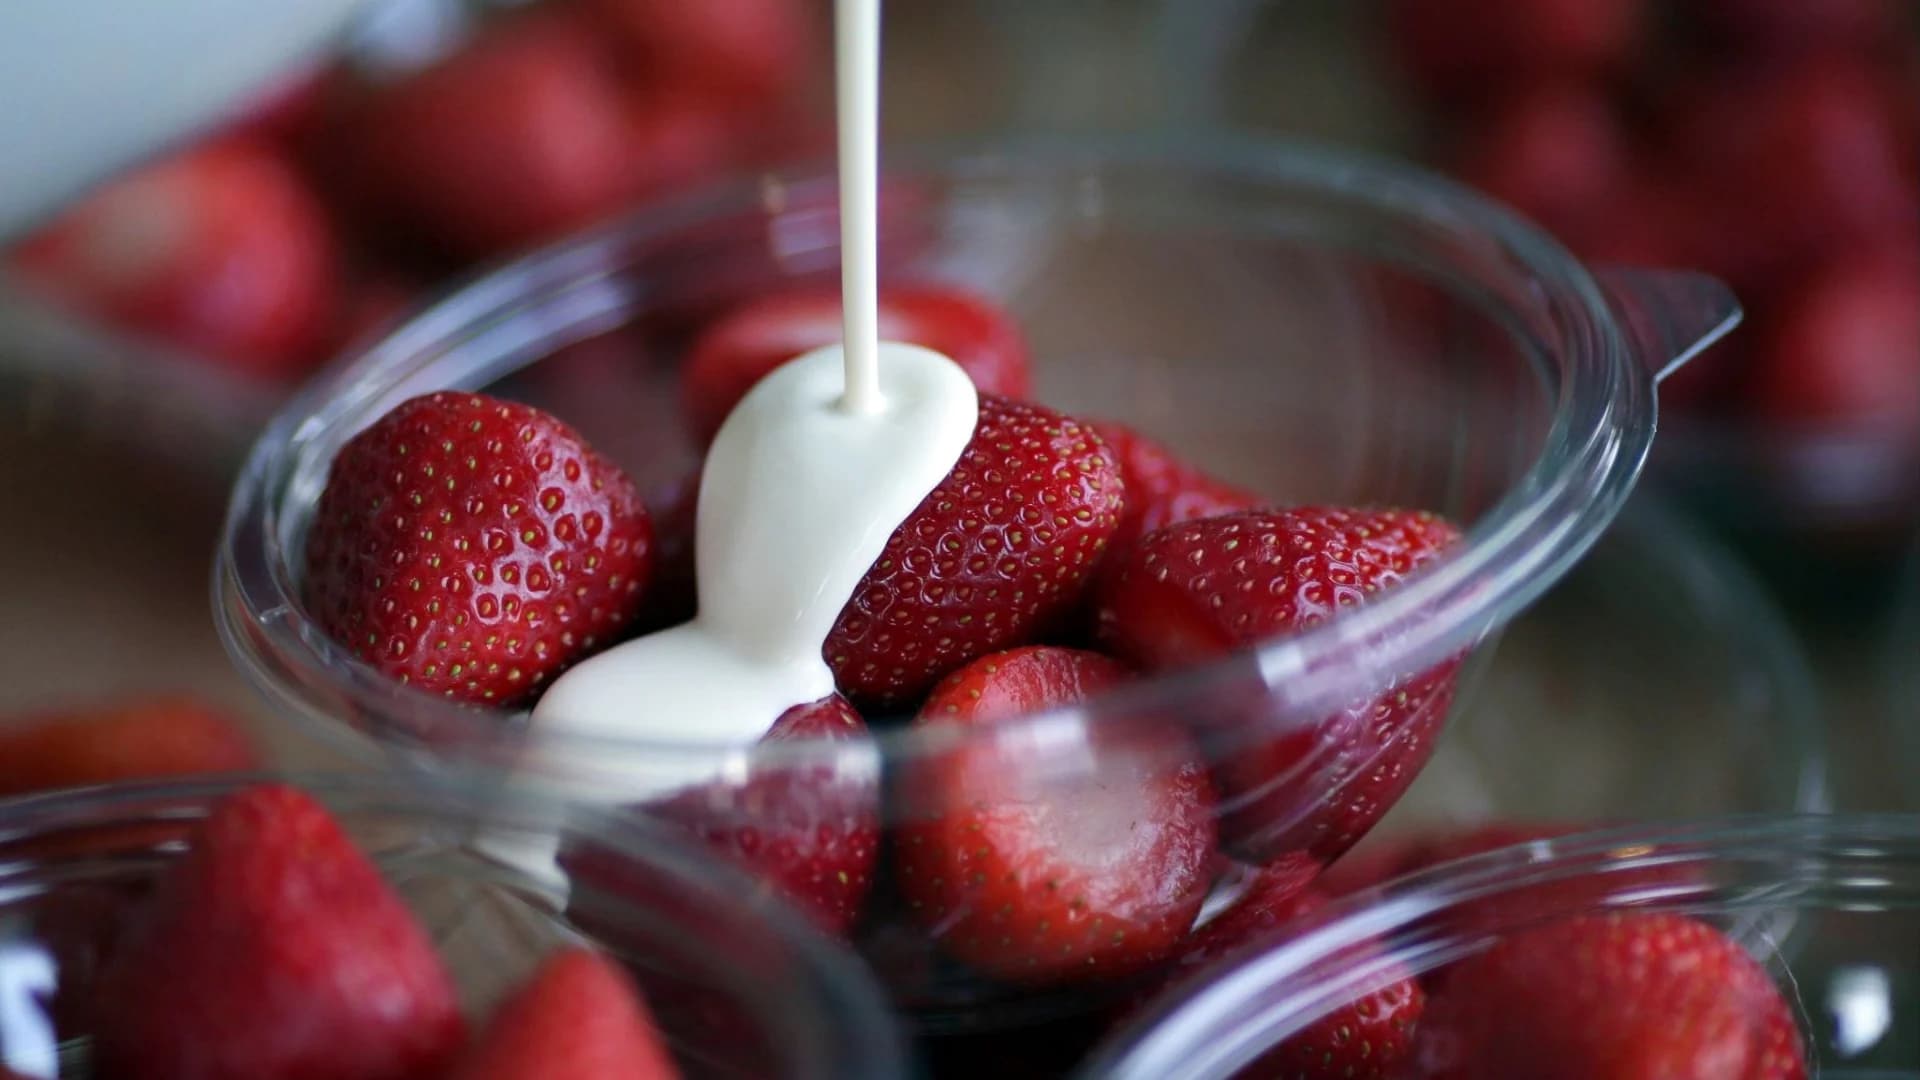 How much do you know about strawberries? Take our quiz and find out!